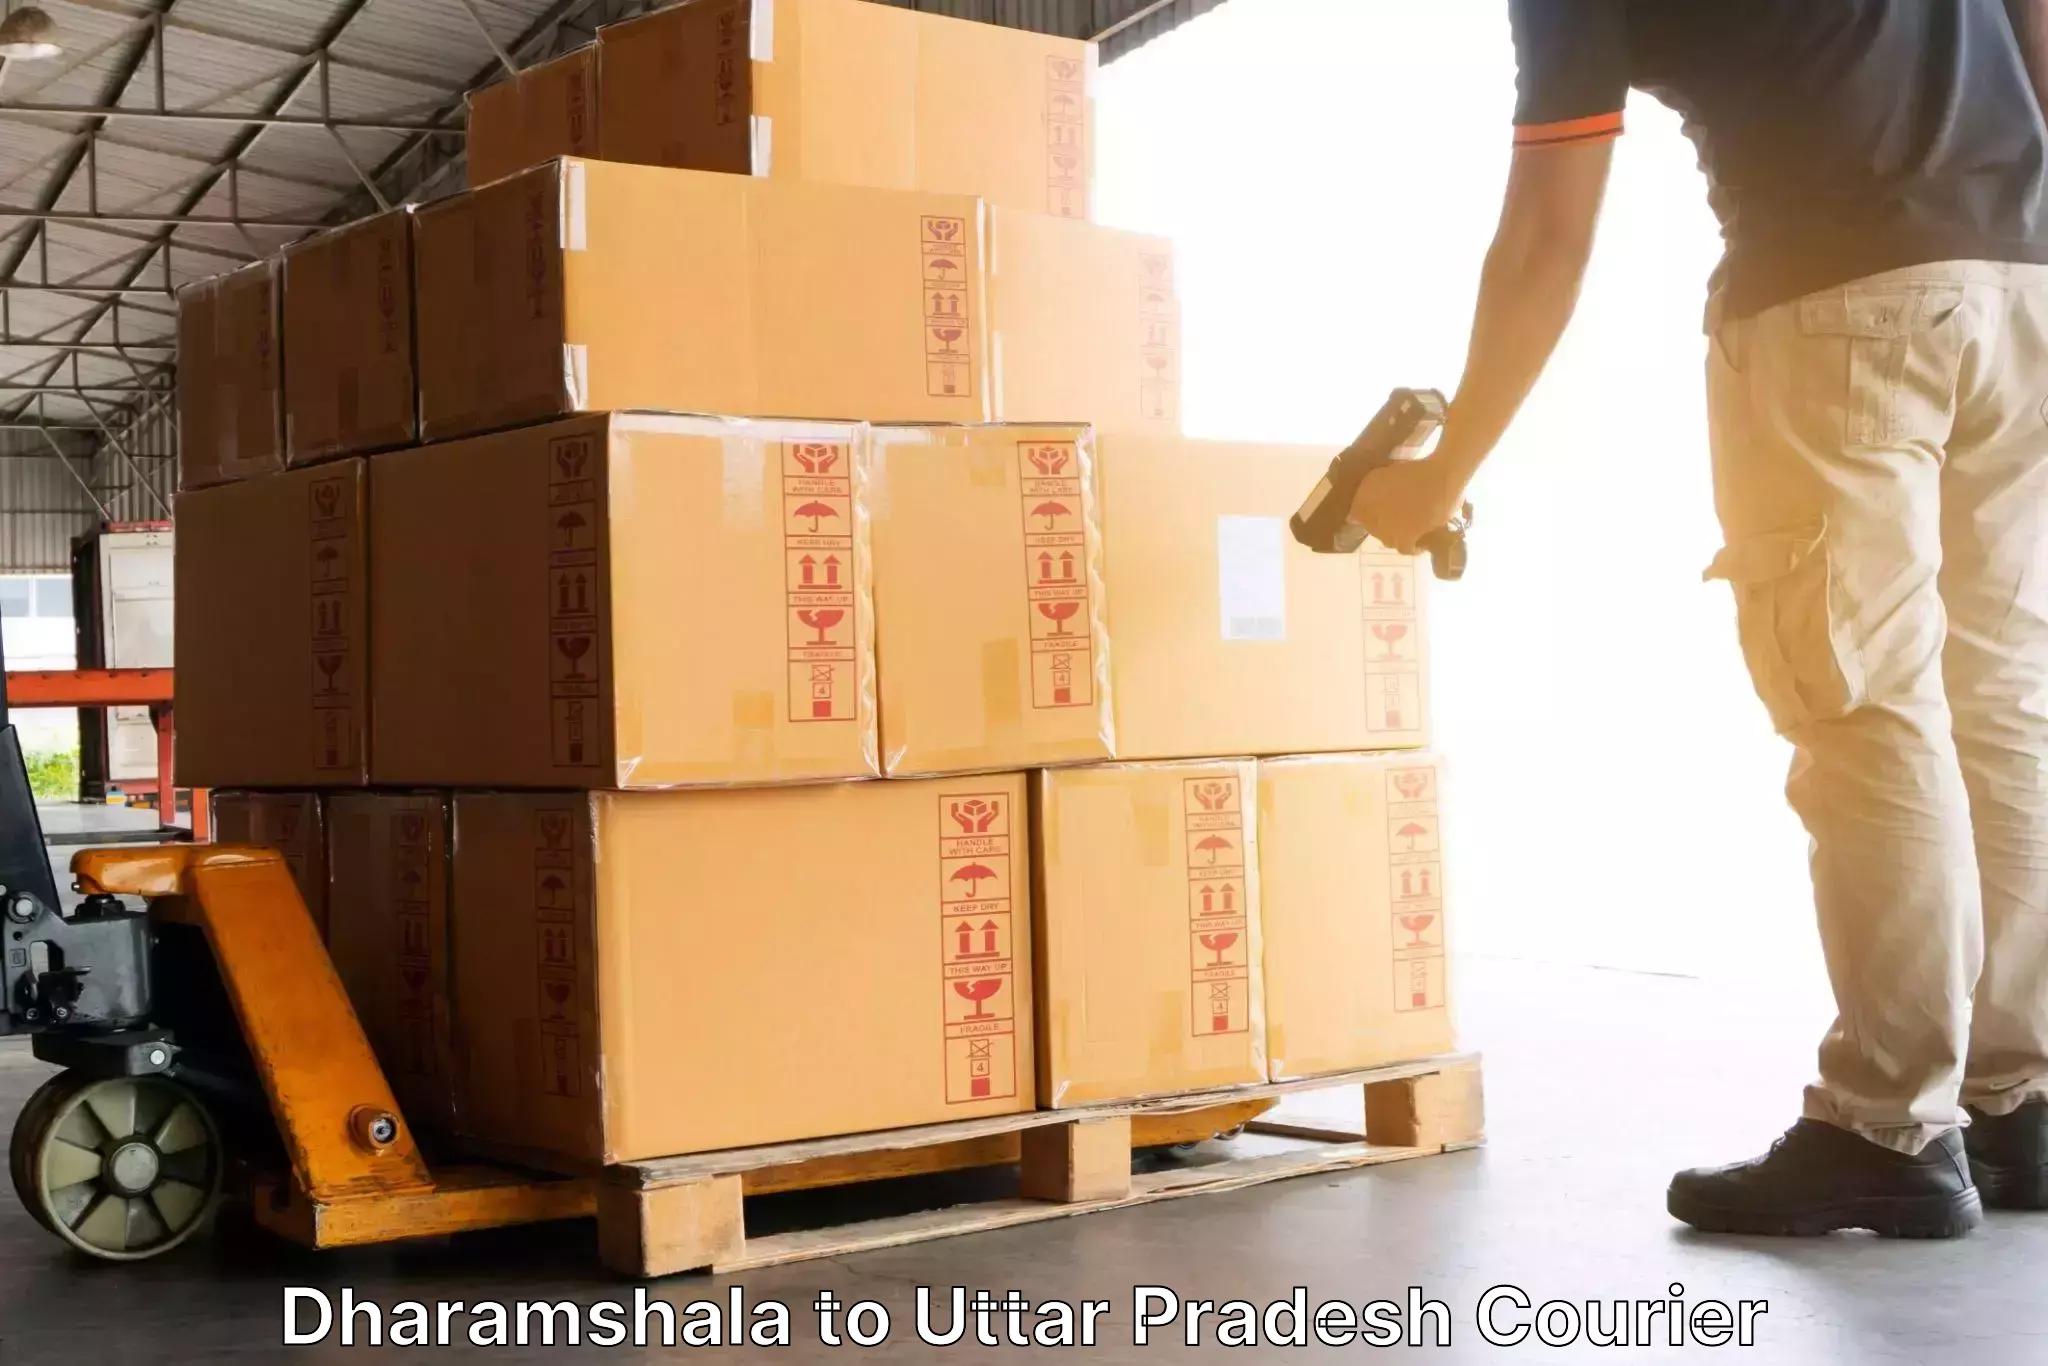 Courier dispatch services Dharamshala to Jalesar